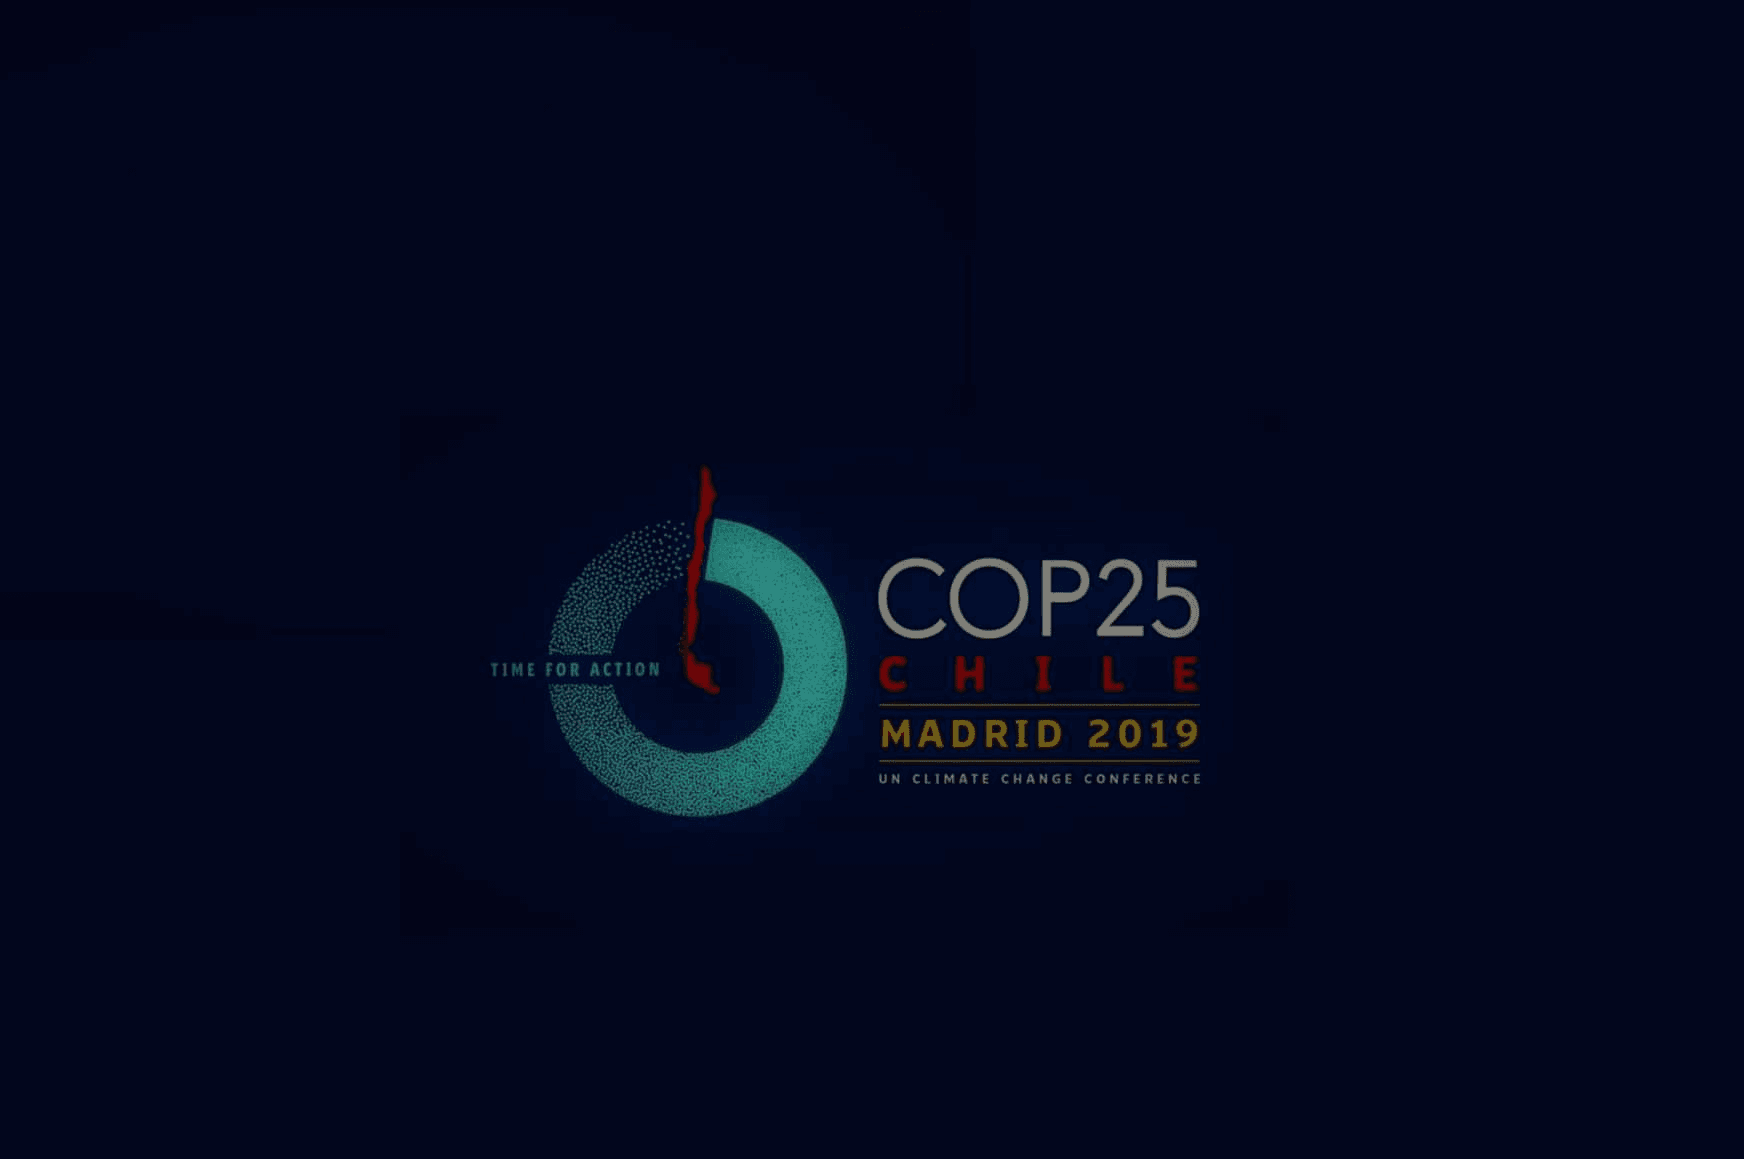 Image COP25: A HISTORY OF THE FUTURE